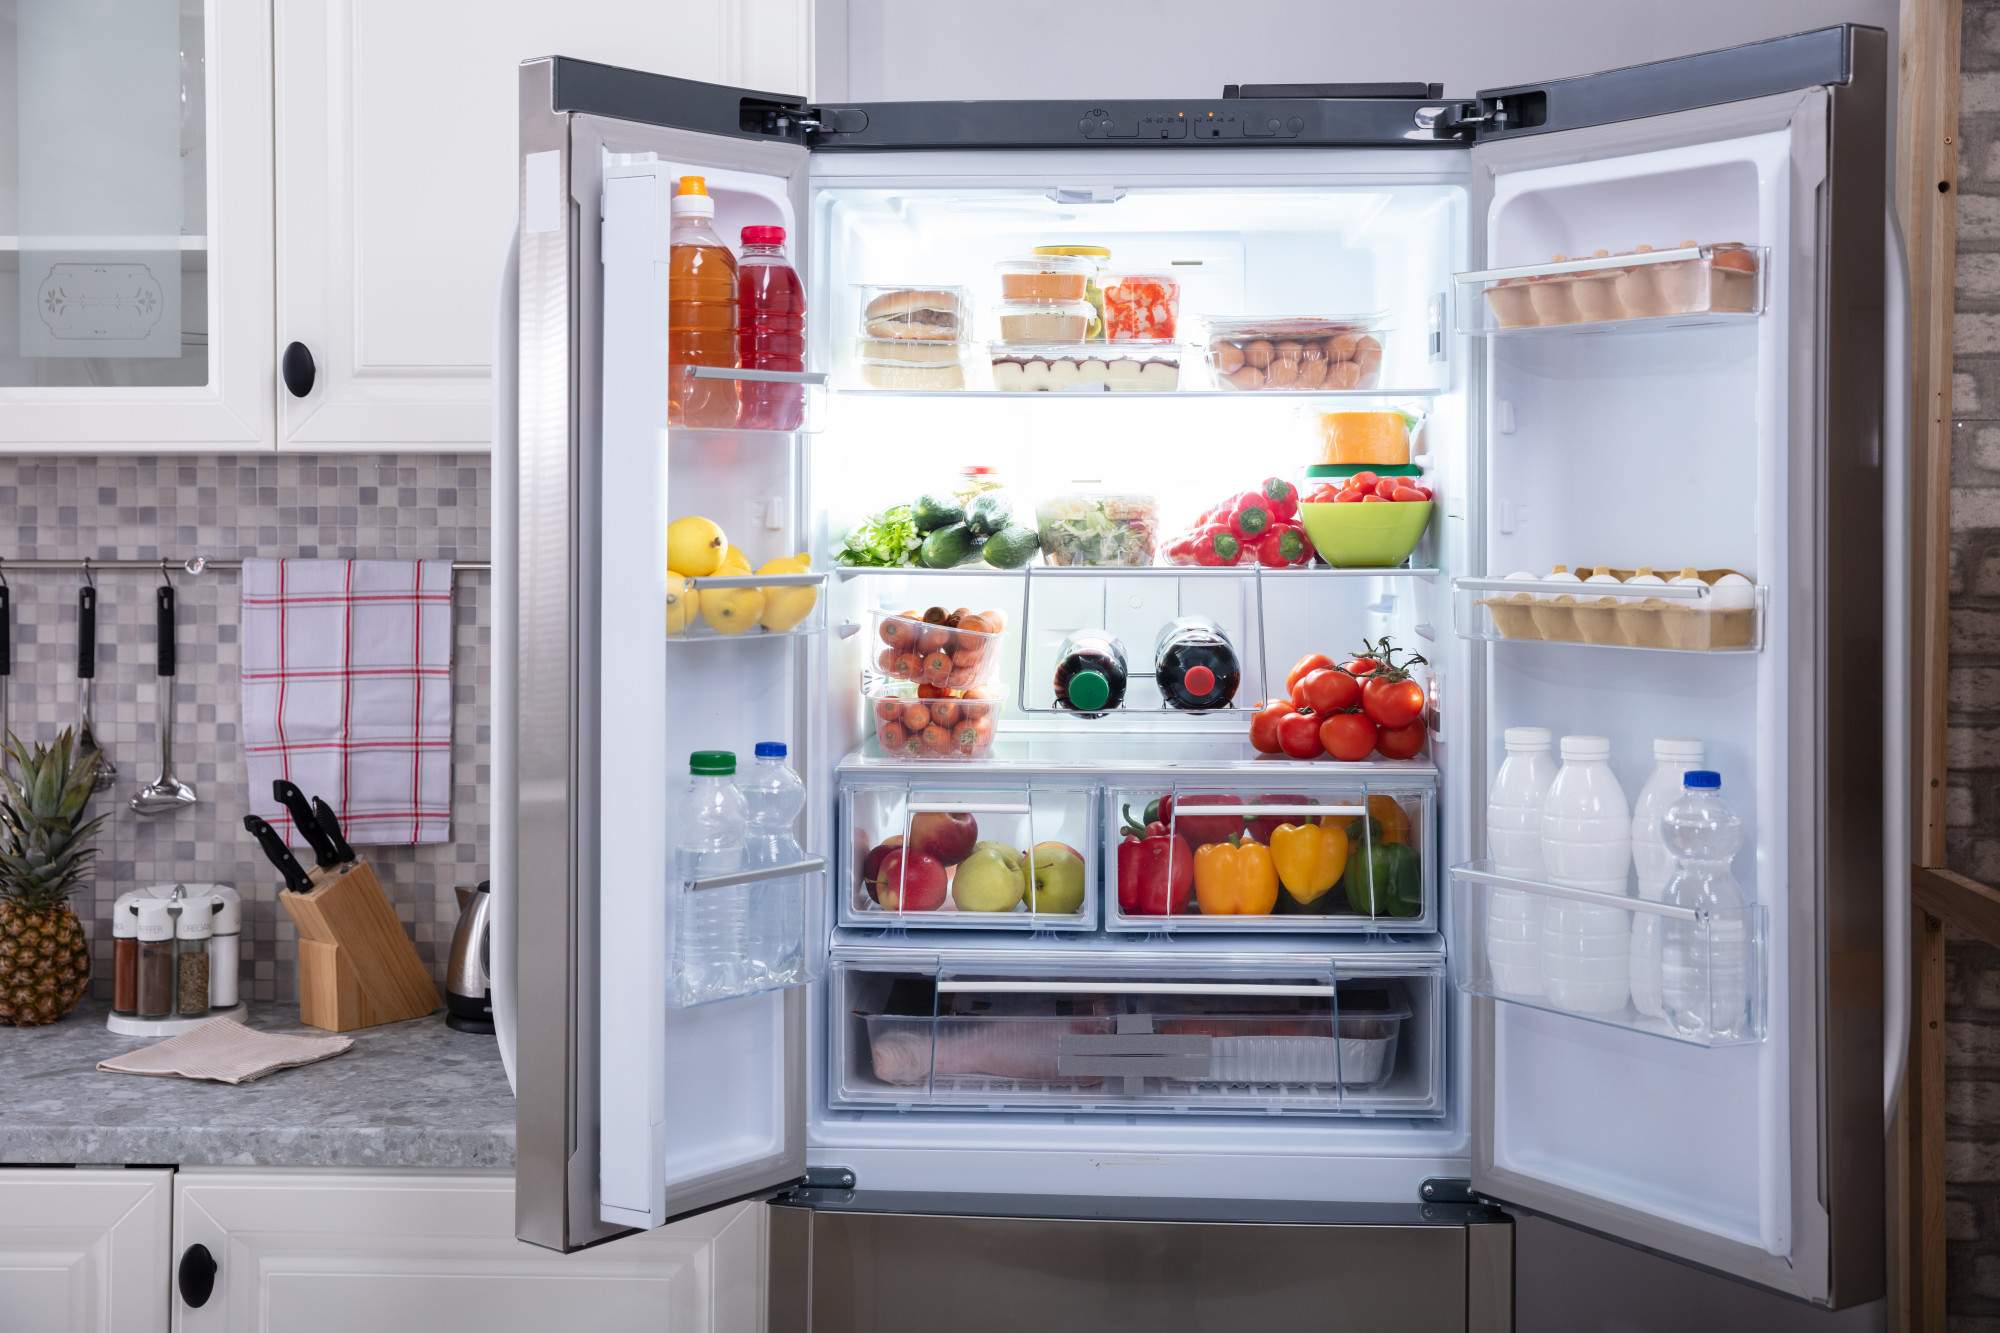 What Are the Main Types of Refrigerators for Your House?